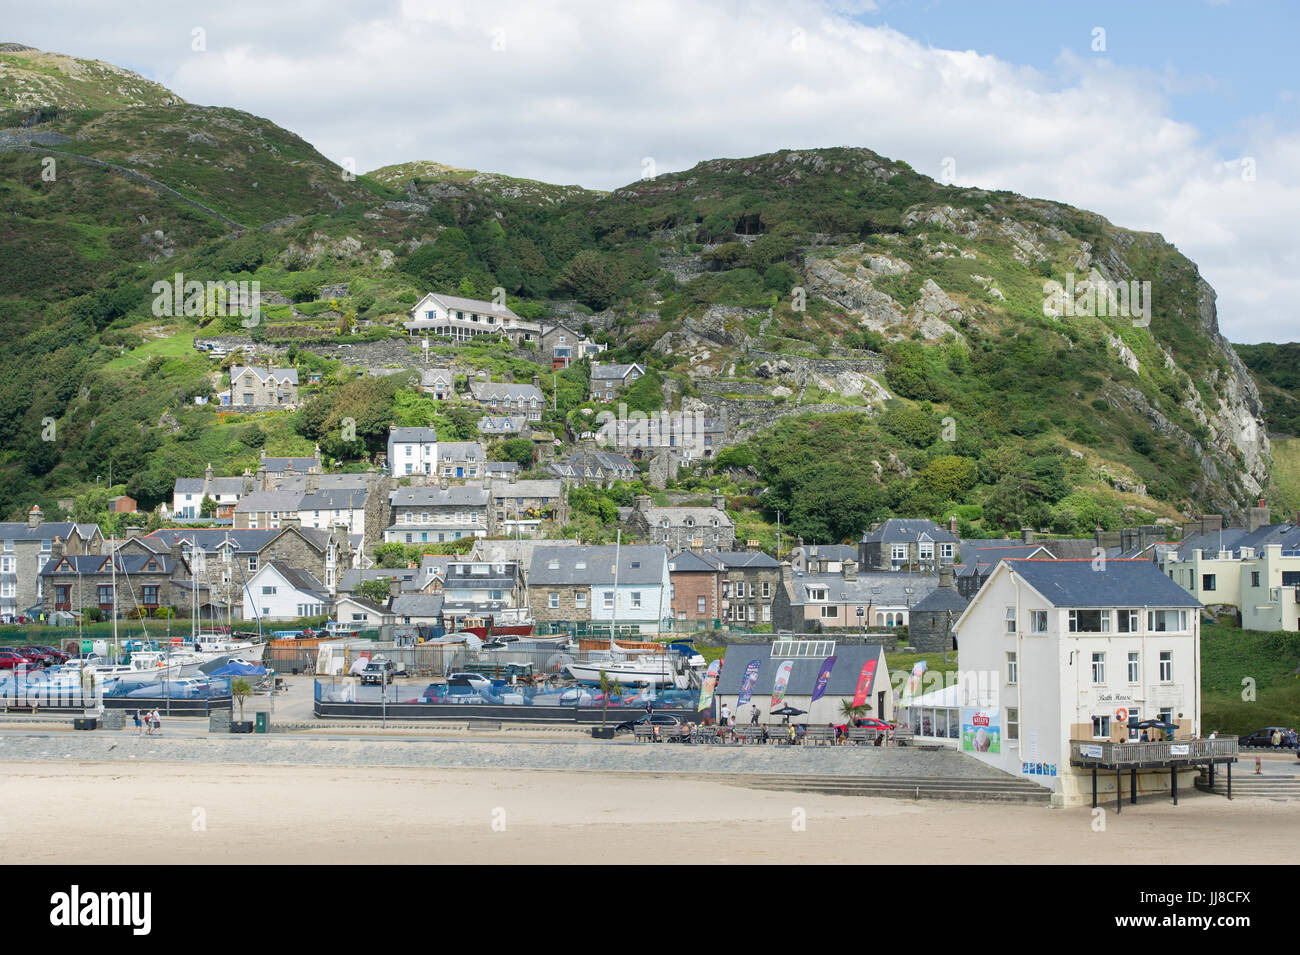 A view of the town and beach at the seaside town of Barmouth in Wales Stock Photo